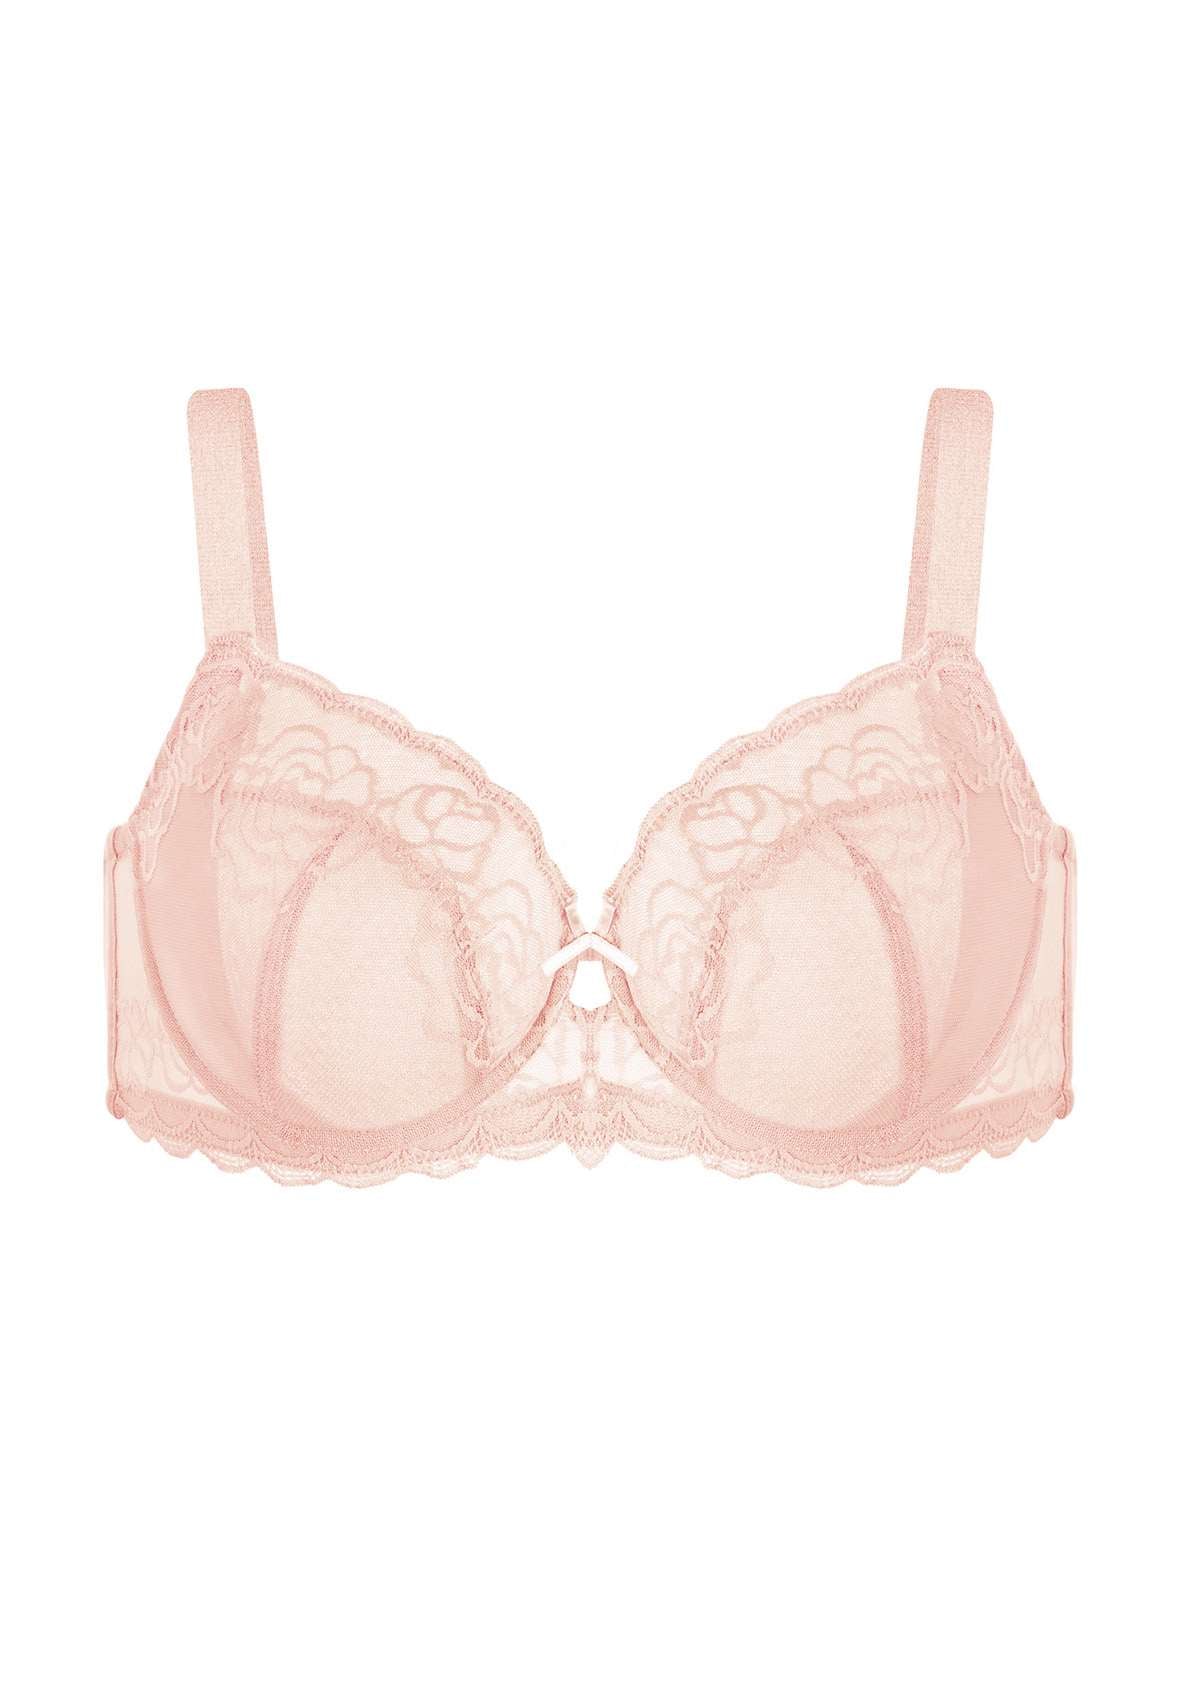 Belong To You Lace Bra - Neon Pink